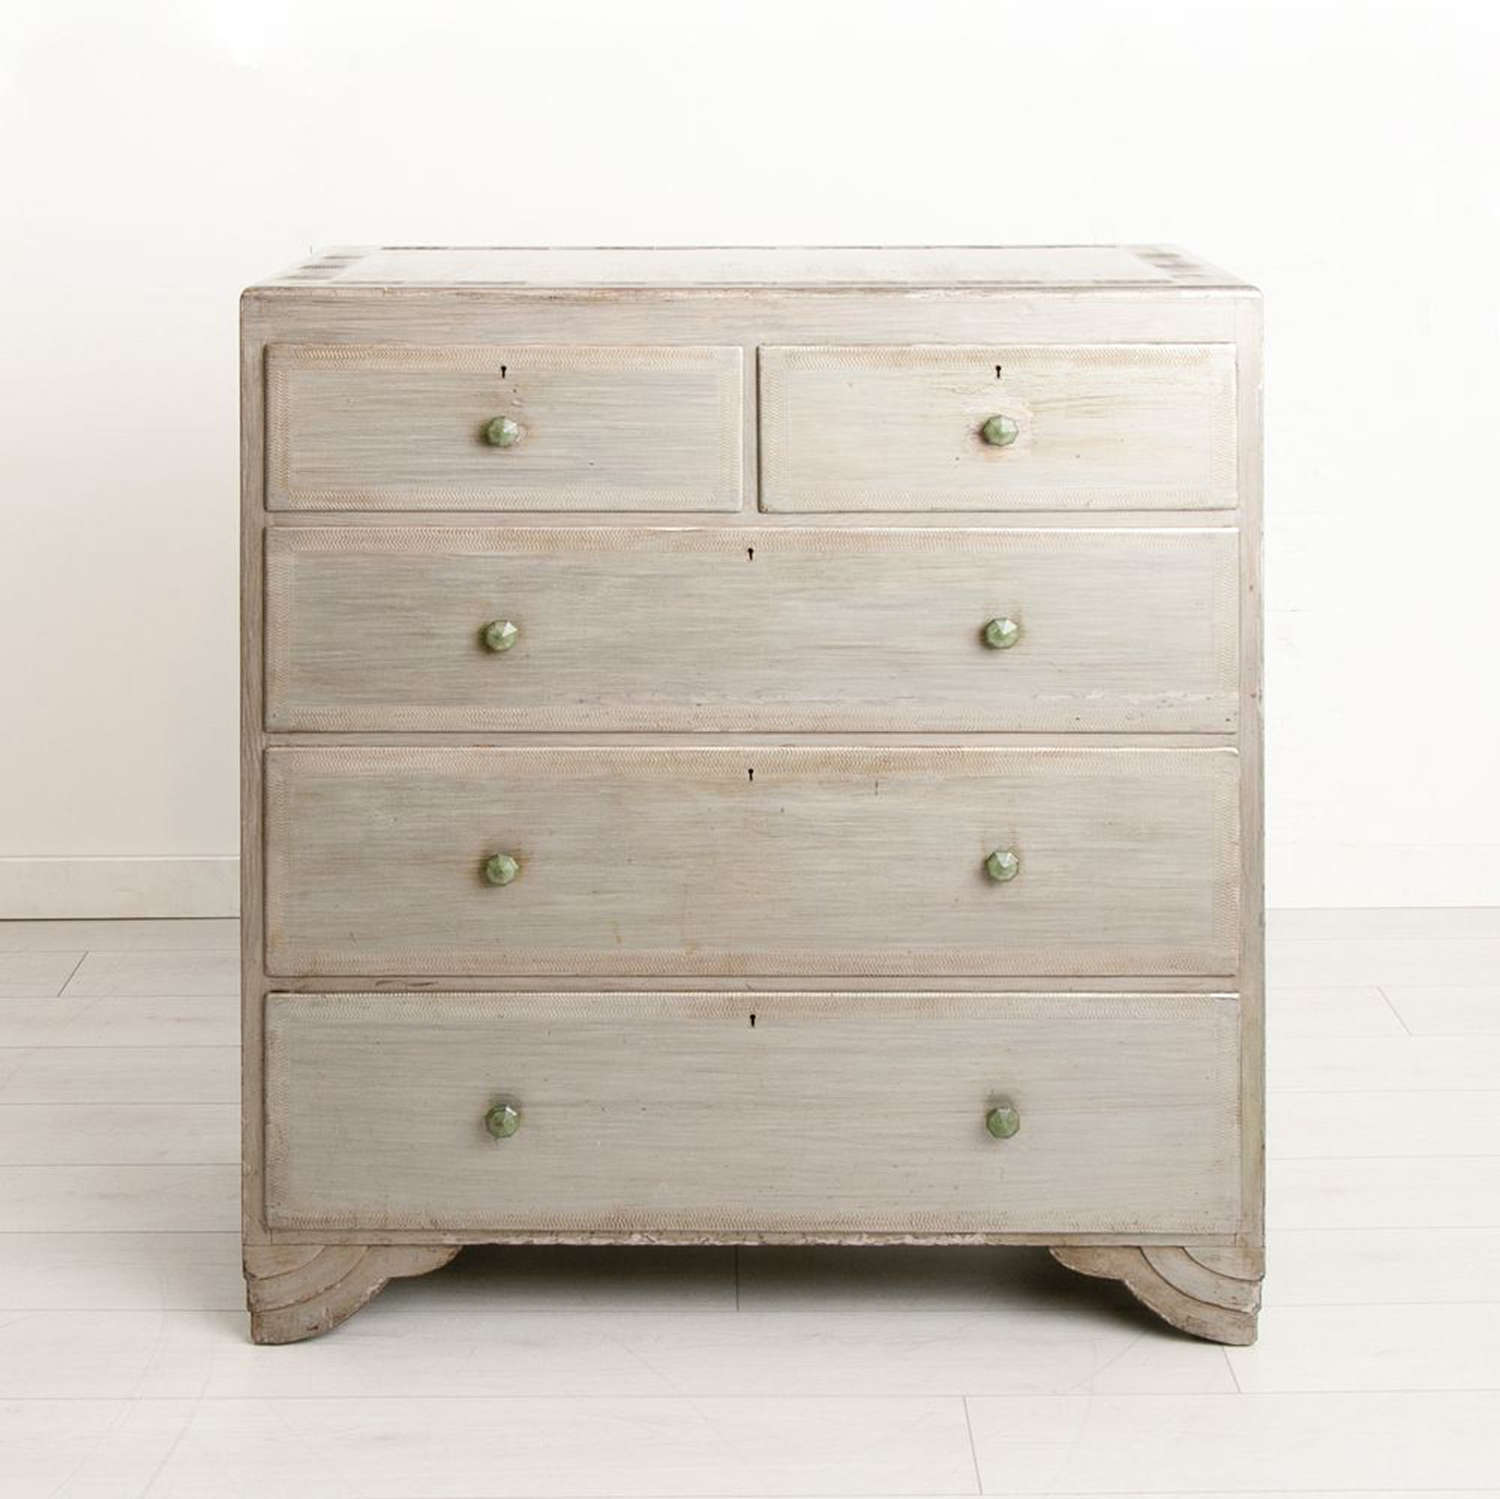 Art Deco Chest of Drawers by Rowley of London c.1930